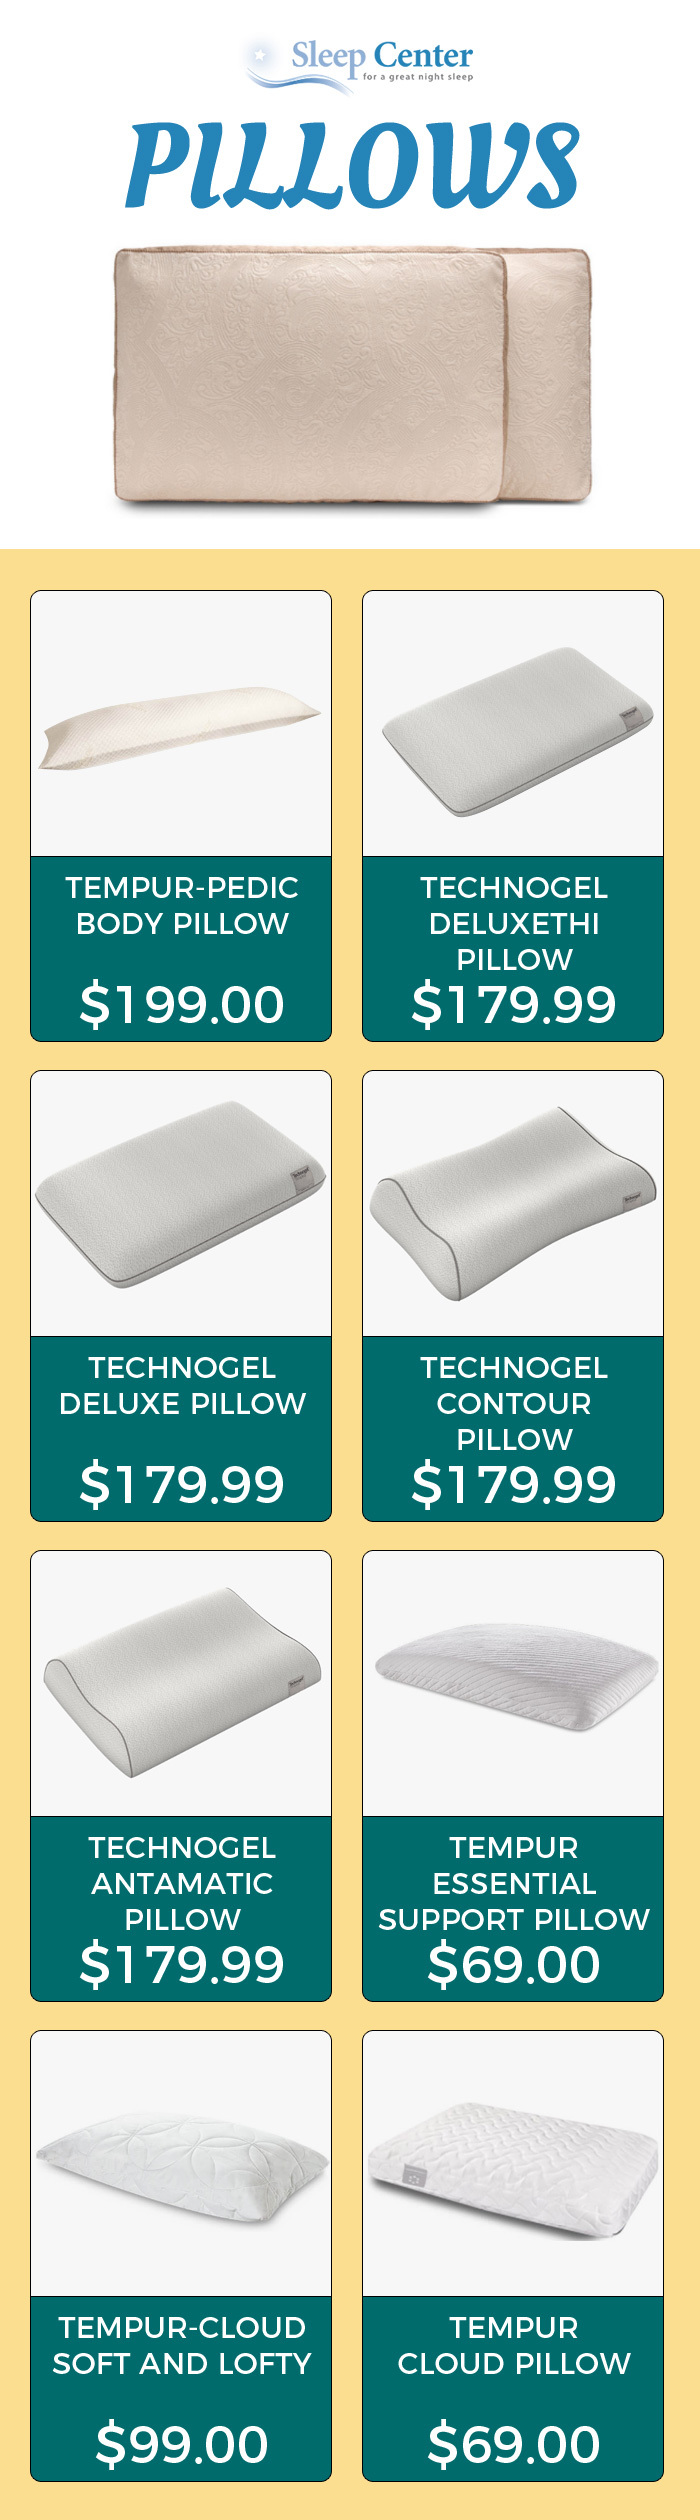 Shop Brand New Bed Pillows Online at Best Prices from Sleep Center